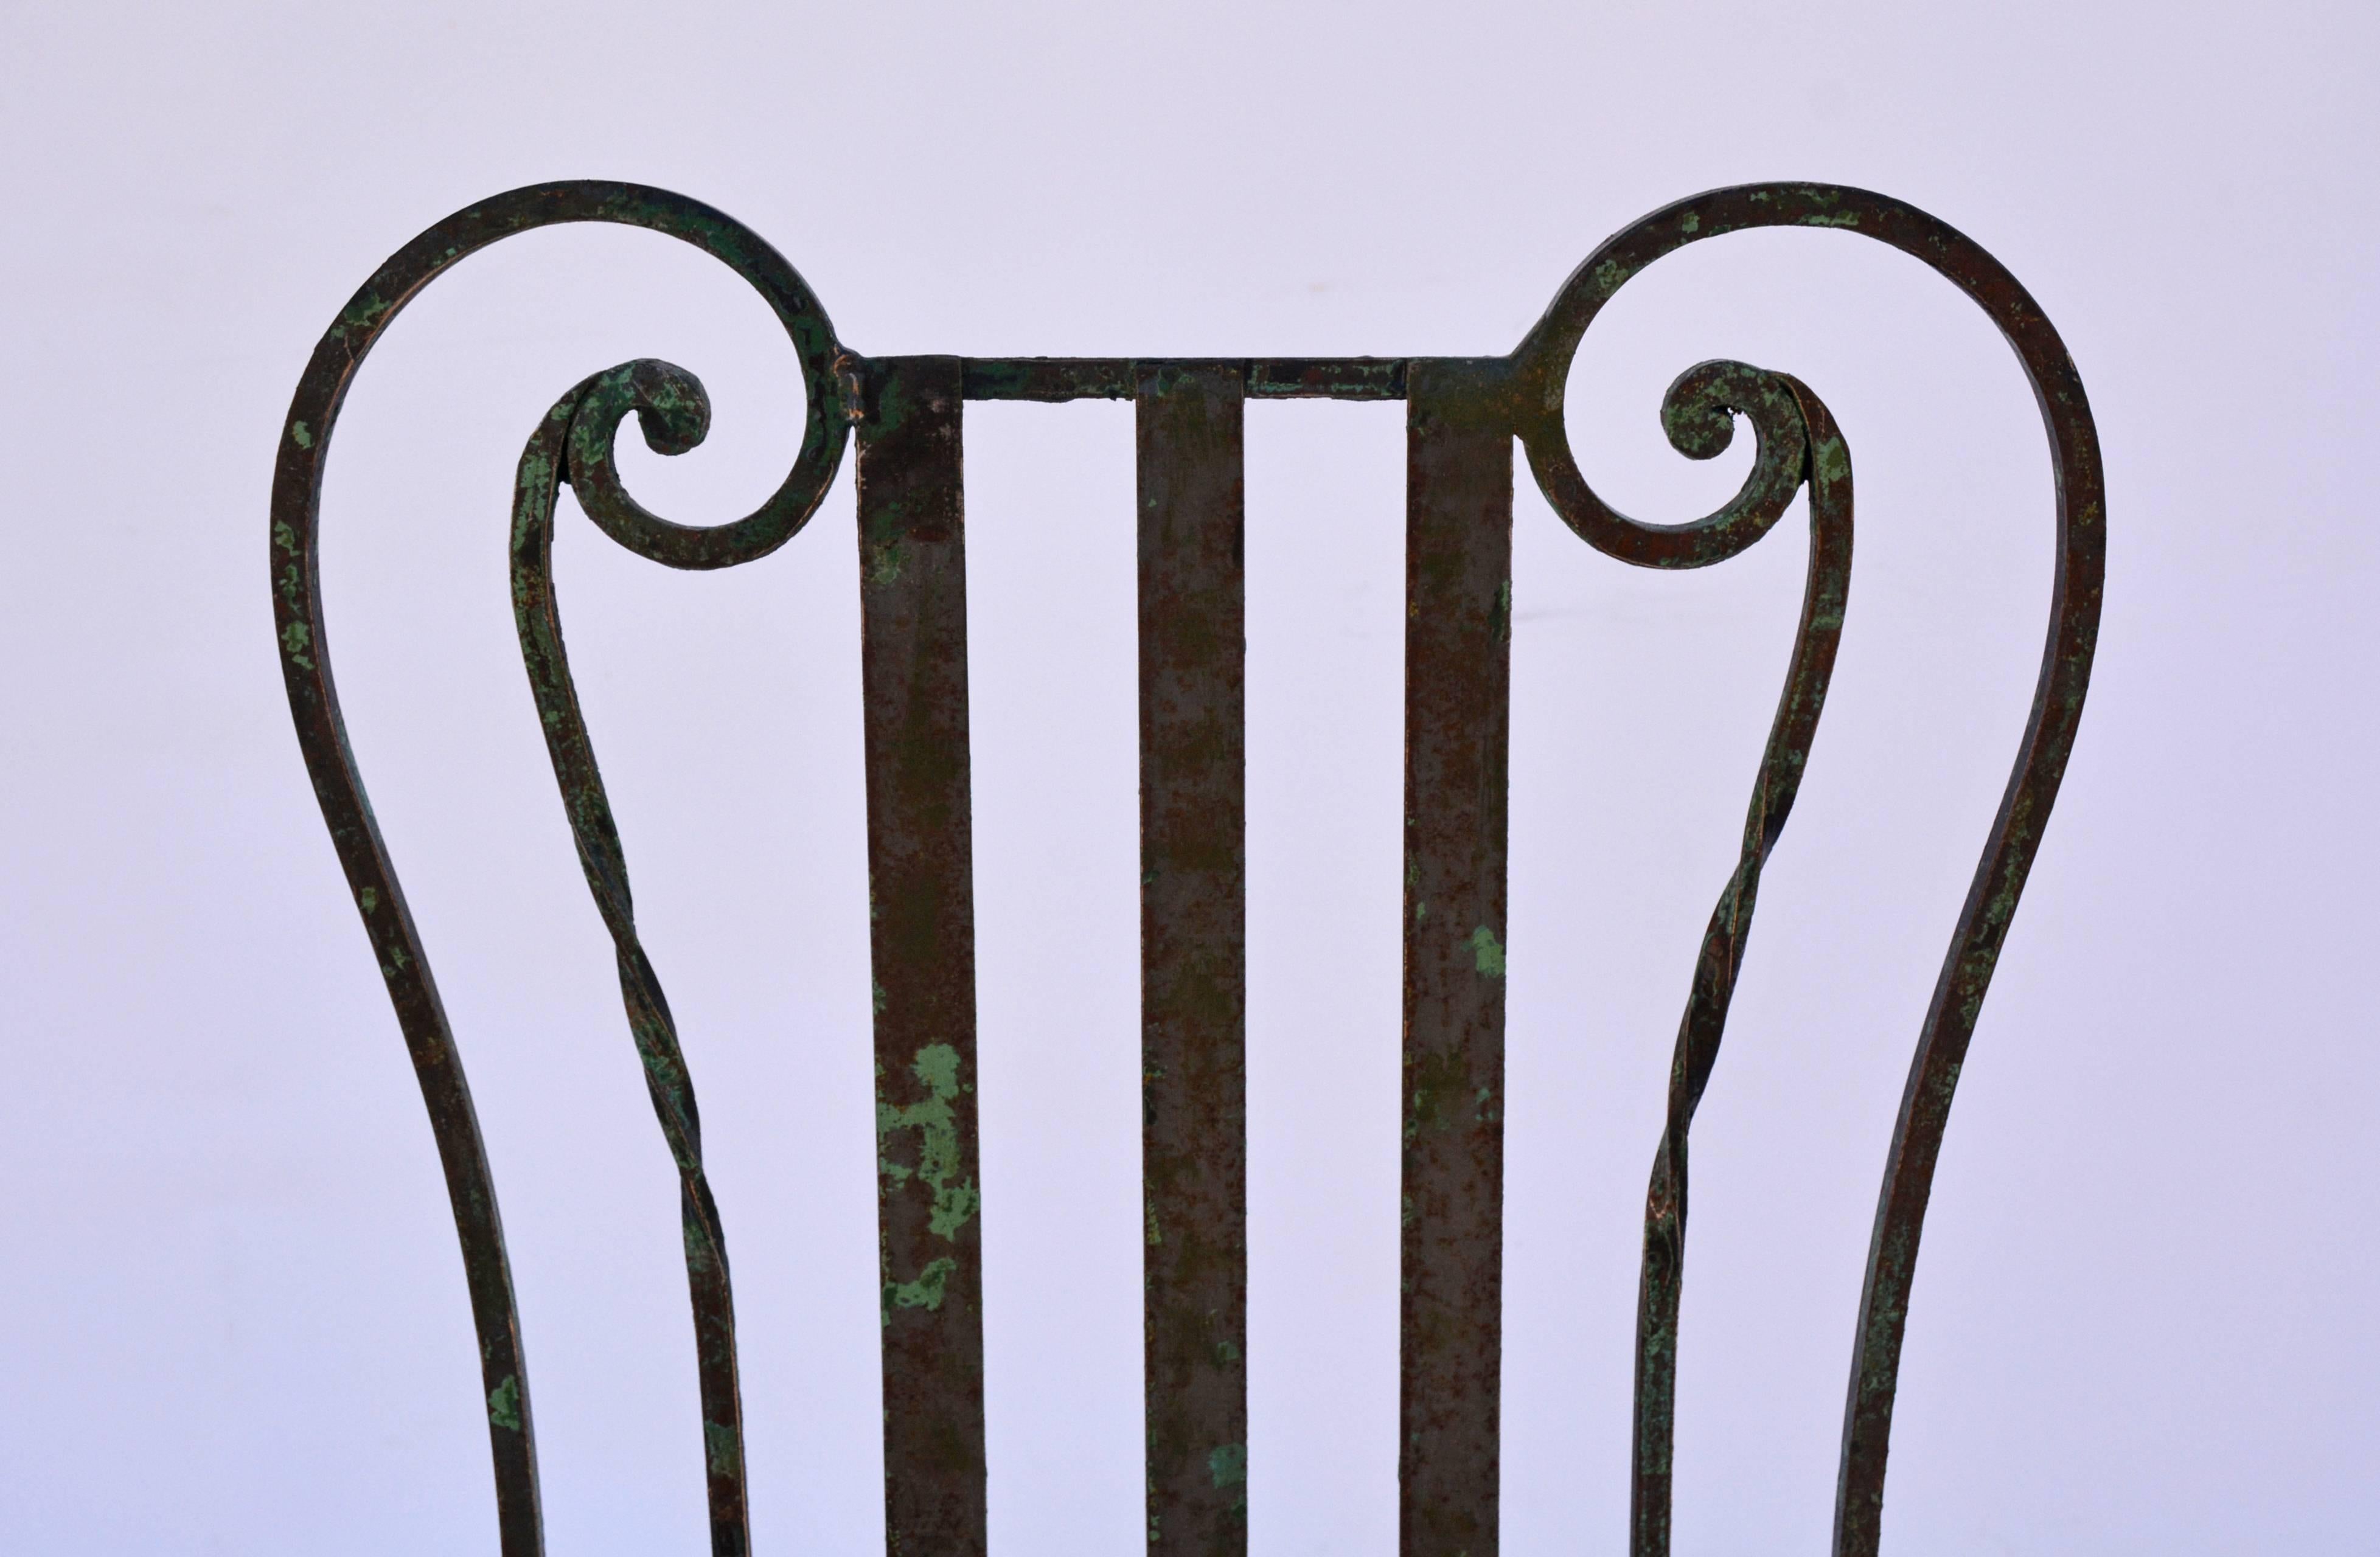 Neoclassical Revival Lyre-Style Wrought-Iron Cafe Garden Chair